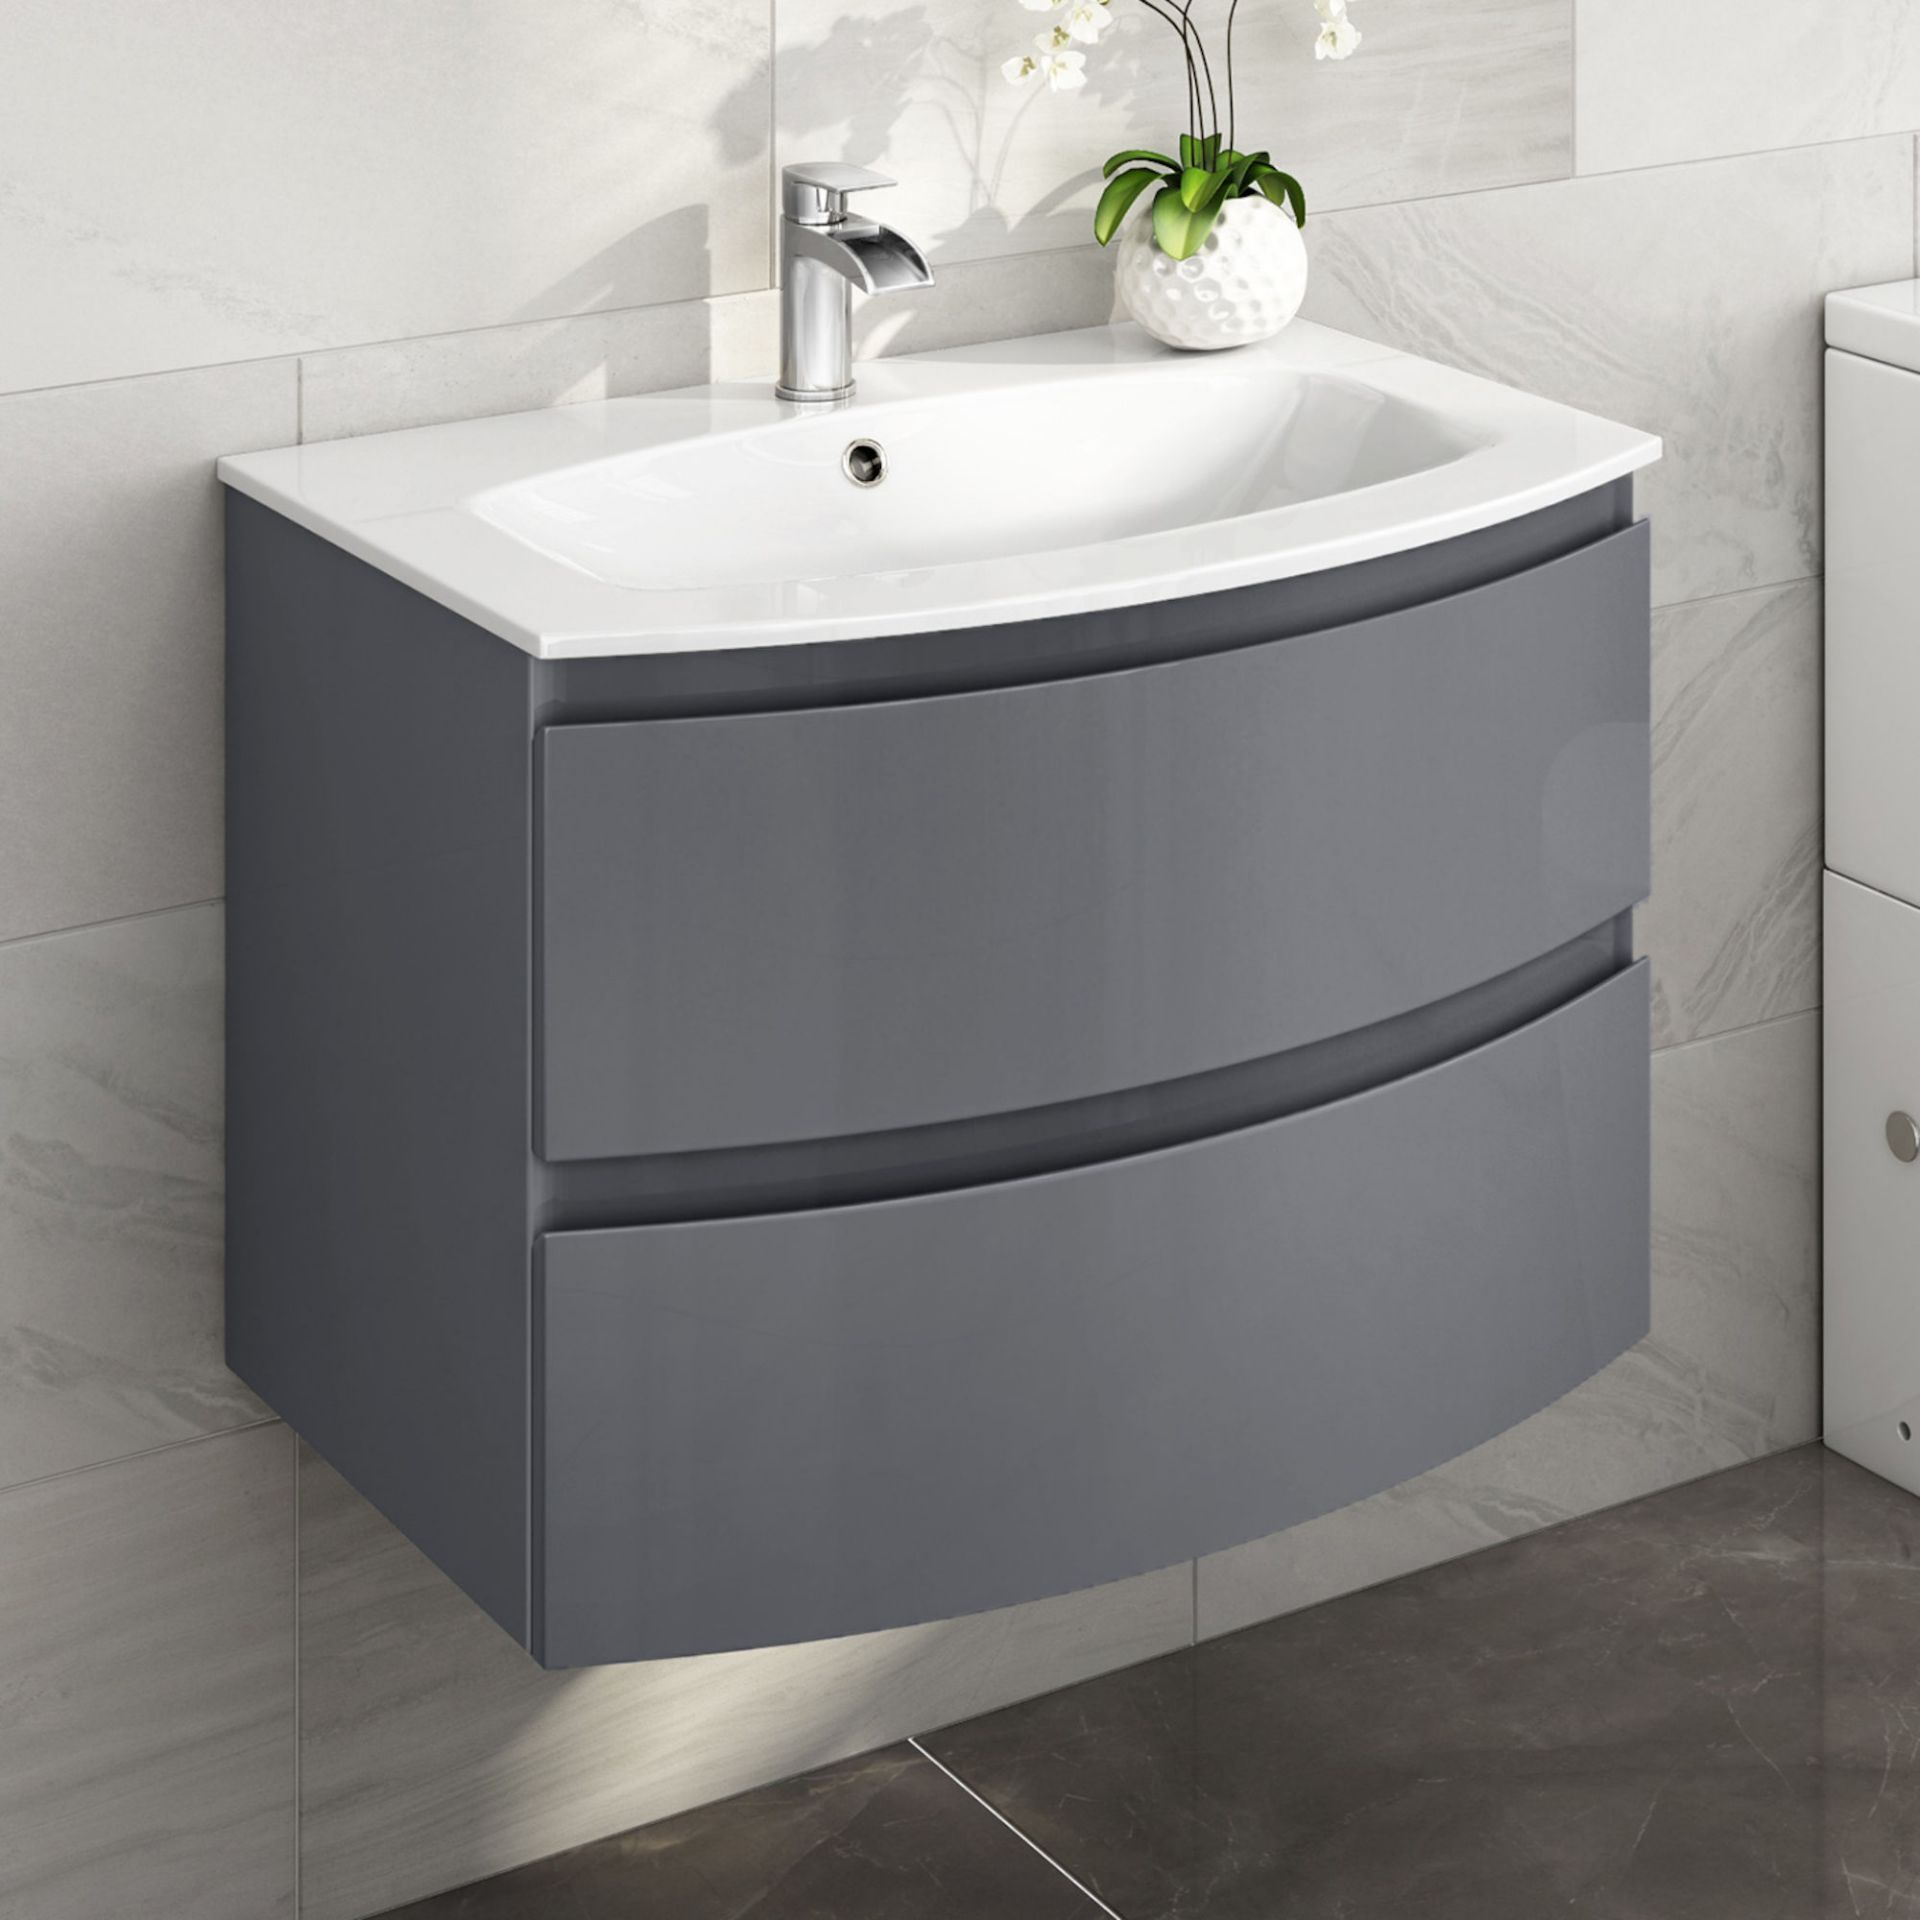 700mm Amelie Gloss Grey Curved Vanity Unit - Wall Hung. RRP £899.99. Comes complete with basin...